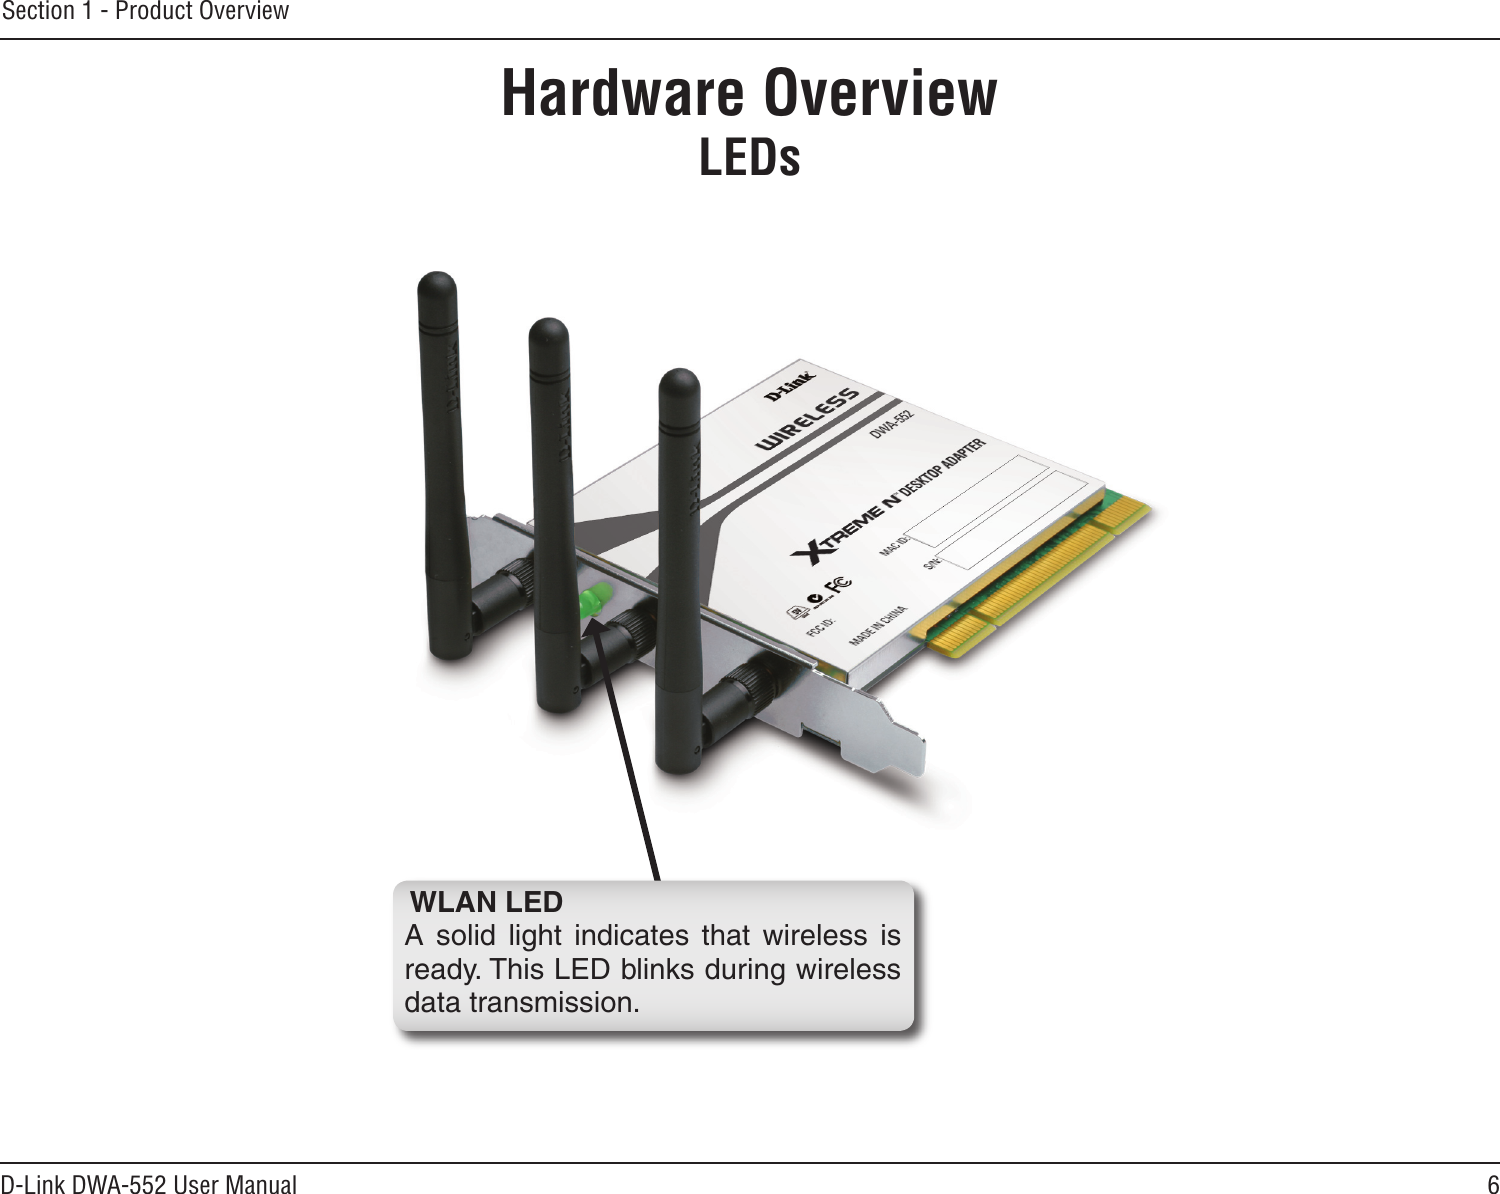 6D-Link DWA-552 User ManualSection 1 - Product OverviewHardware OverviewLEDsWLAN LEDA  solid  light  indicates  that  wireless  is ready. This LED blinks during wireless data transmission.